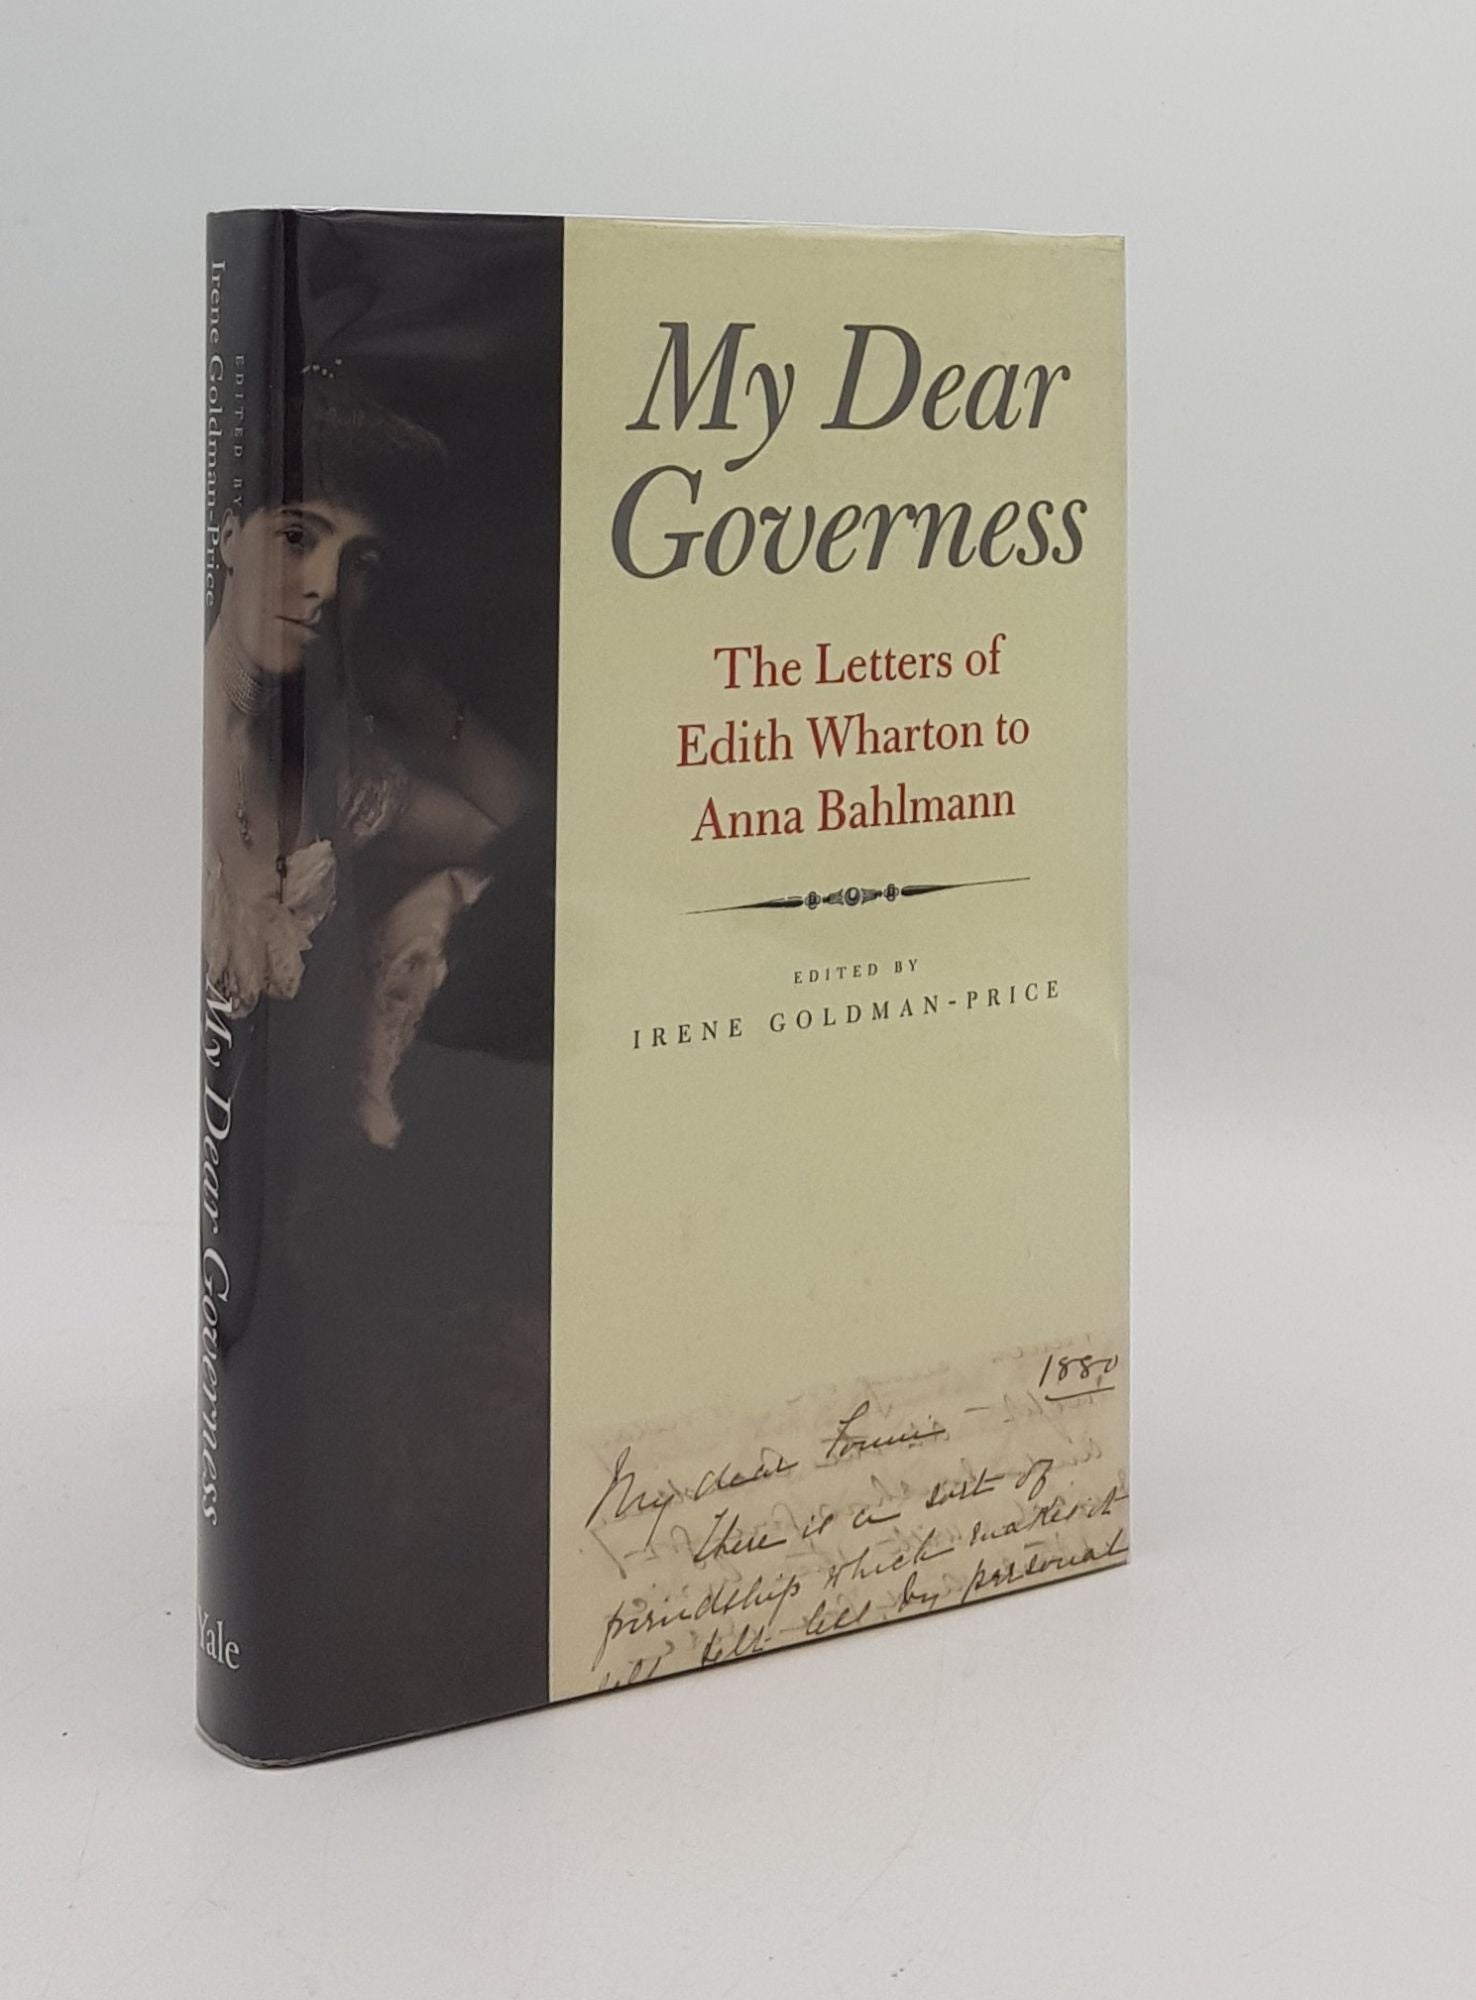 GOLDMAN-PRICE Irene - My Dear Governess the Letters of Edith Wharton to Anna Bahlmann